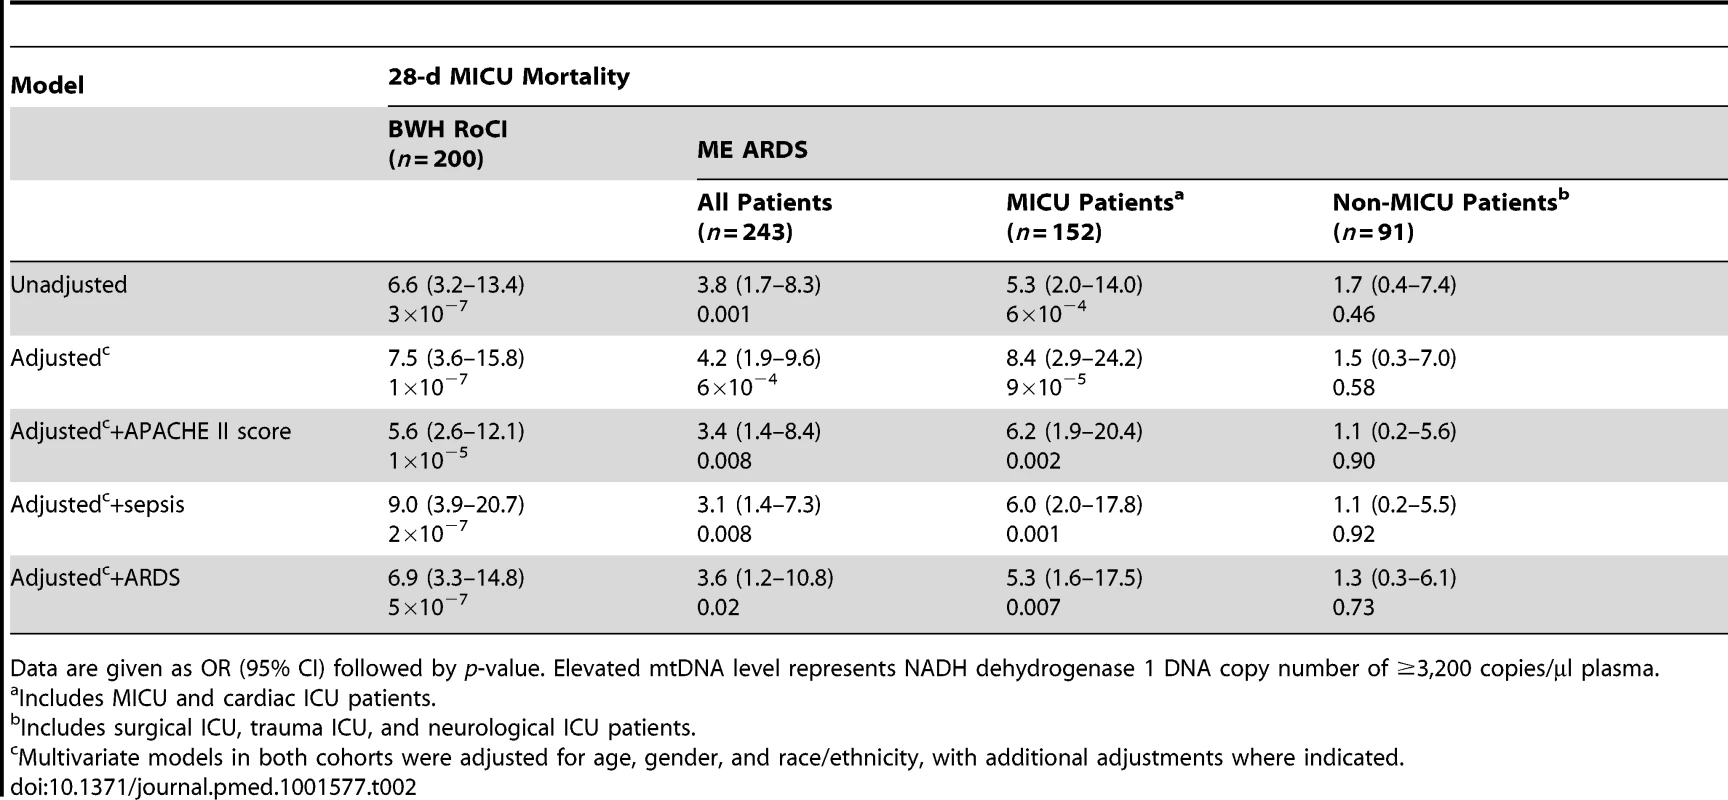 Bivariate and multivariate analyses of association between elevated mtDNA levels and 28-d MICU mortality.